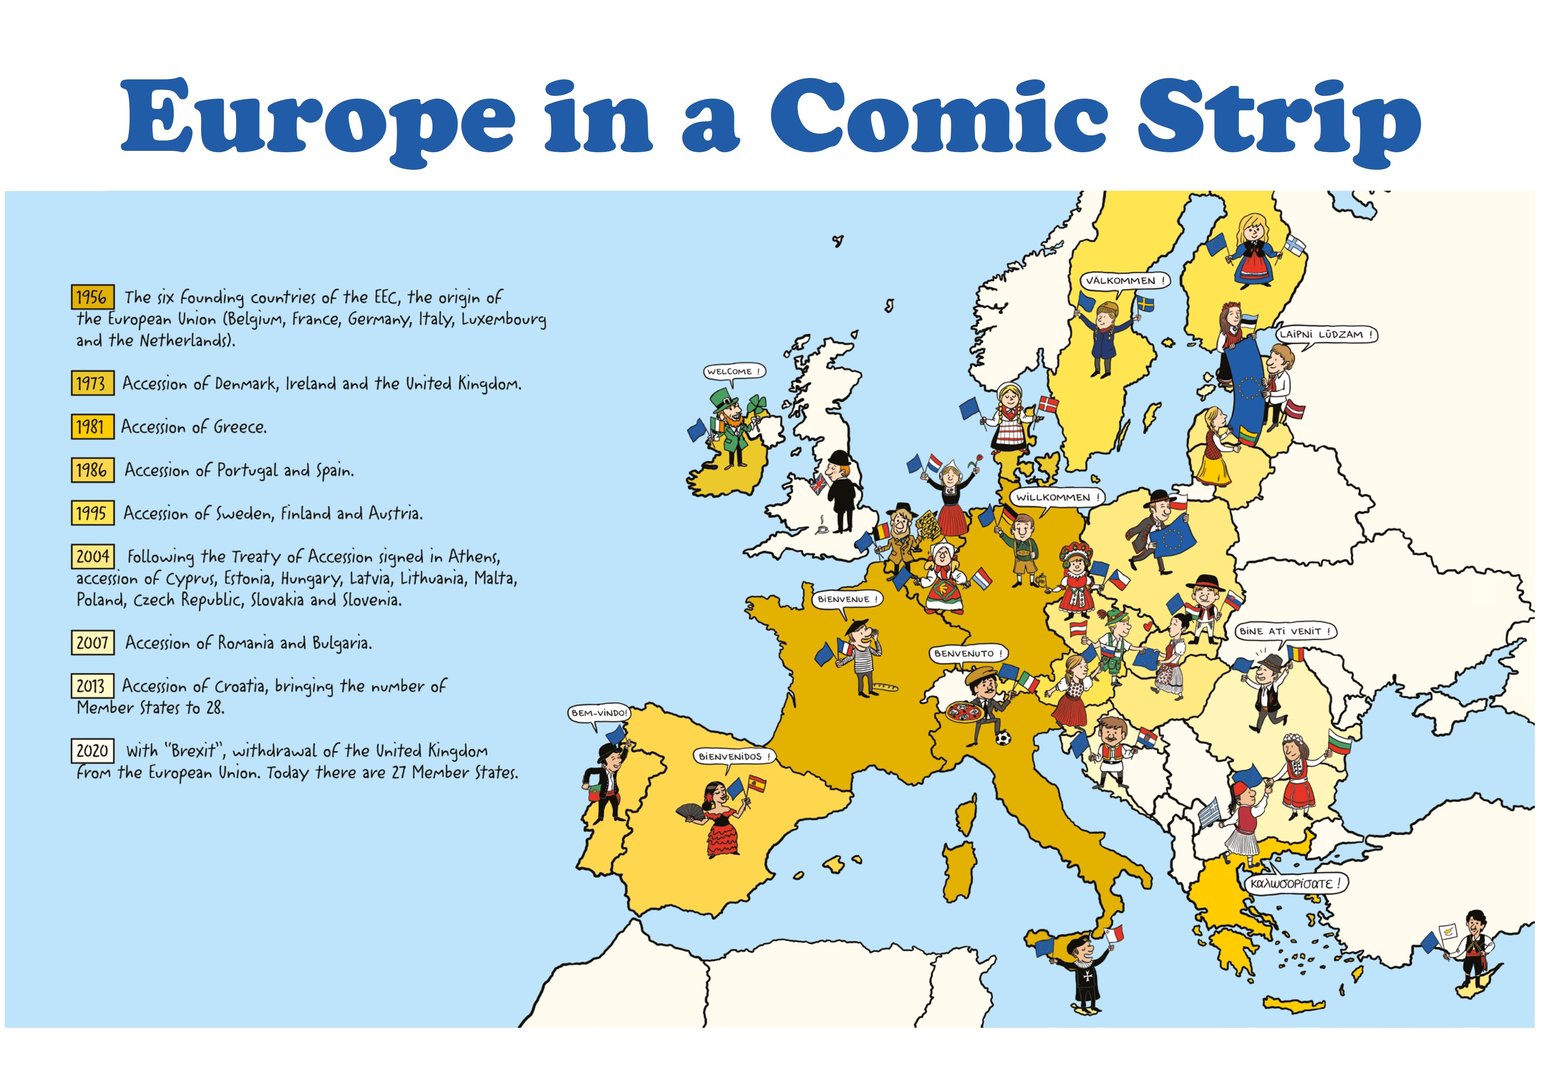 Exhibition: Europe in a Comic Strip